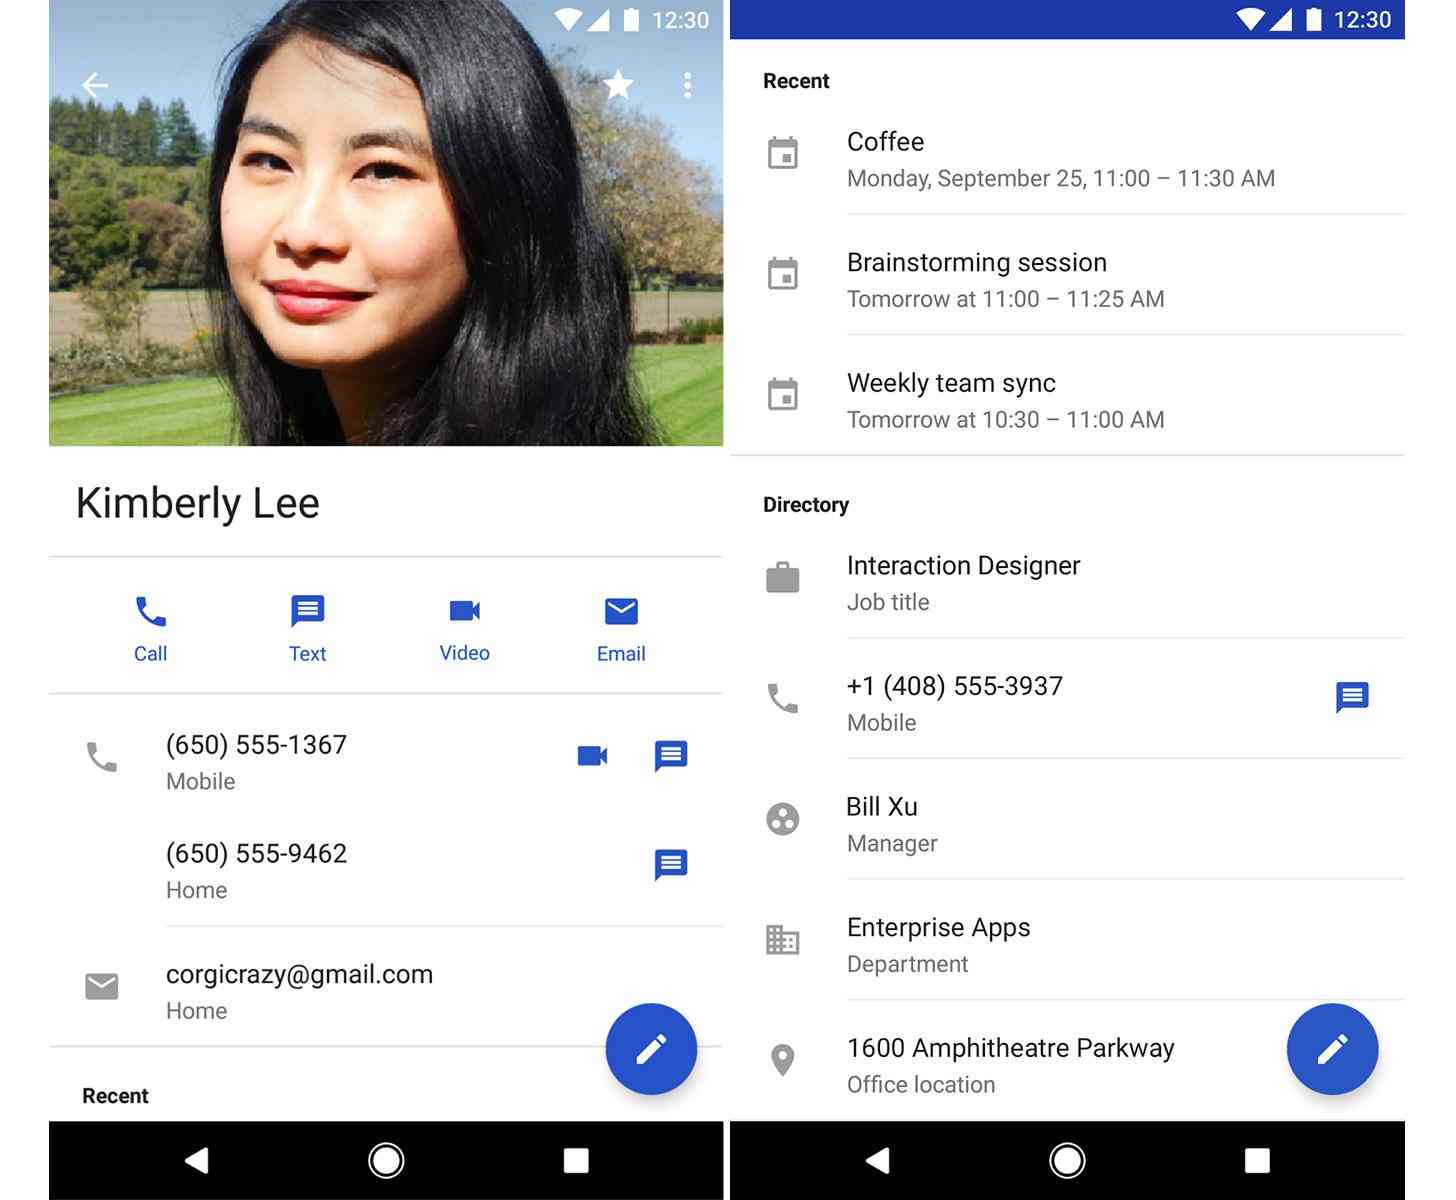 Google Contacts for Android update large photos